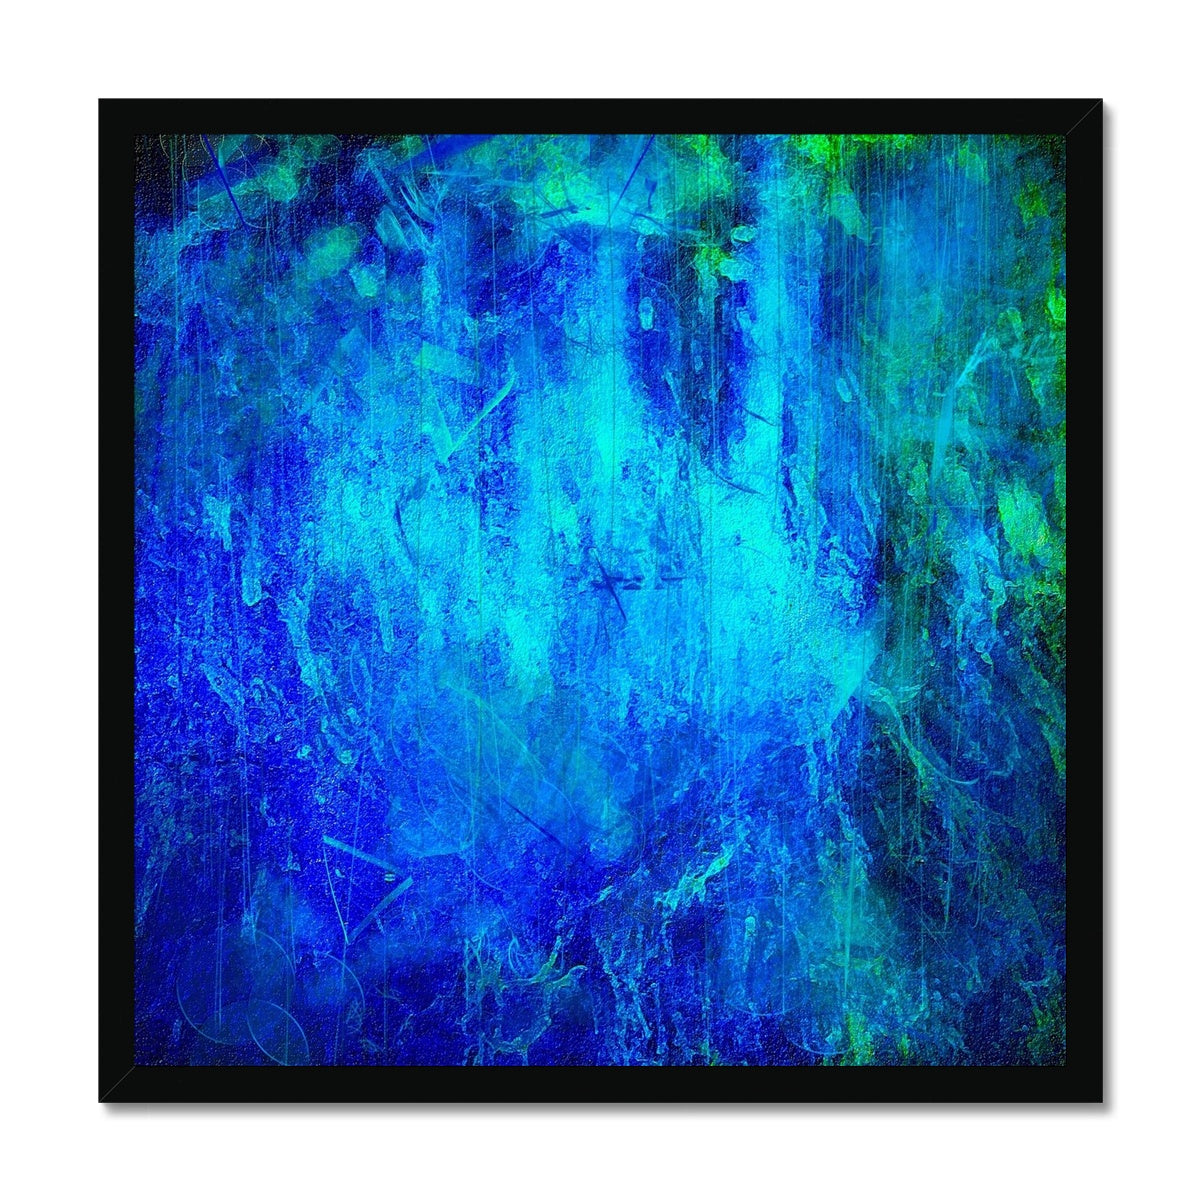 The Waterfall Abstract Painting | Framed Prints From Scotland-Framed Prints-Abstract & Impressionistic Art Gallery-20"x20"-Black Frame-Paintings, Prints, Homeware, Art Gifts From Scotland By Scottish Artist Kevin Hunter